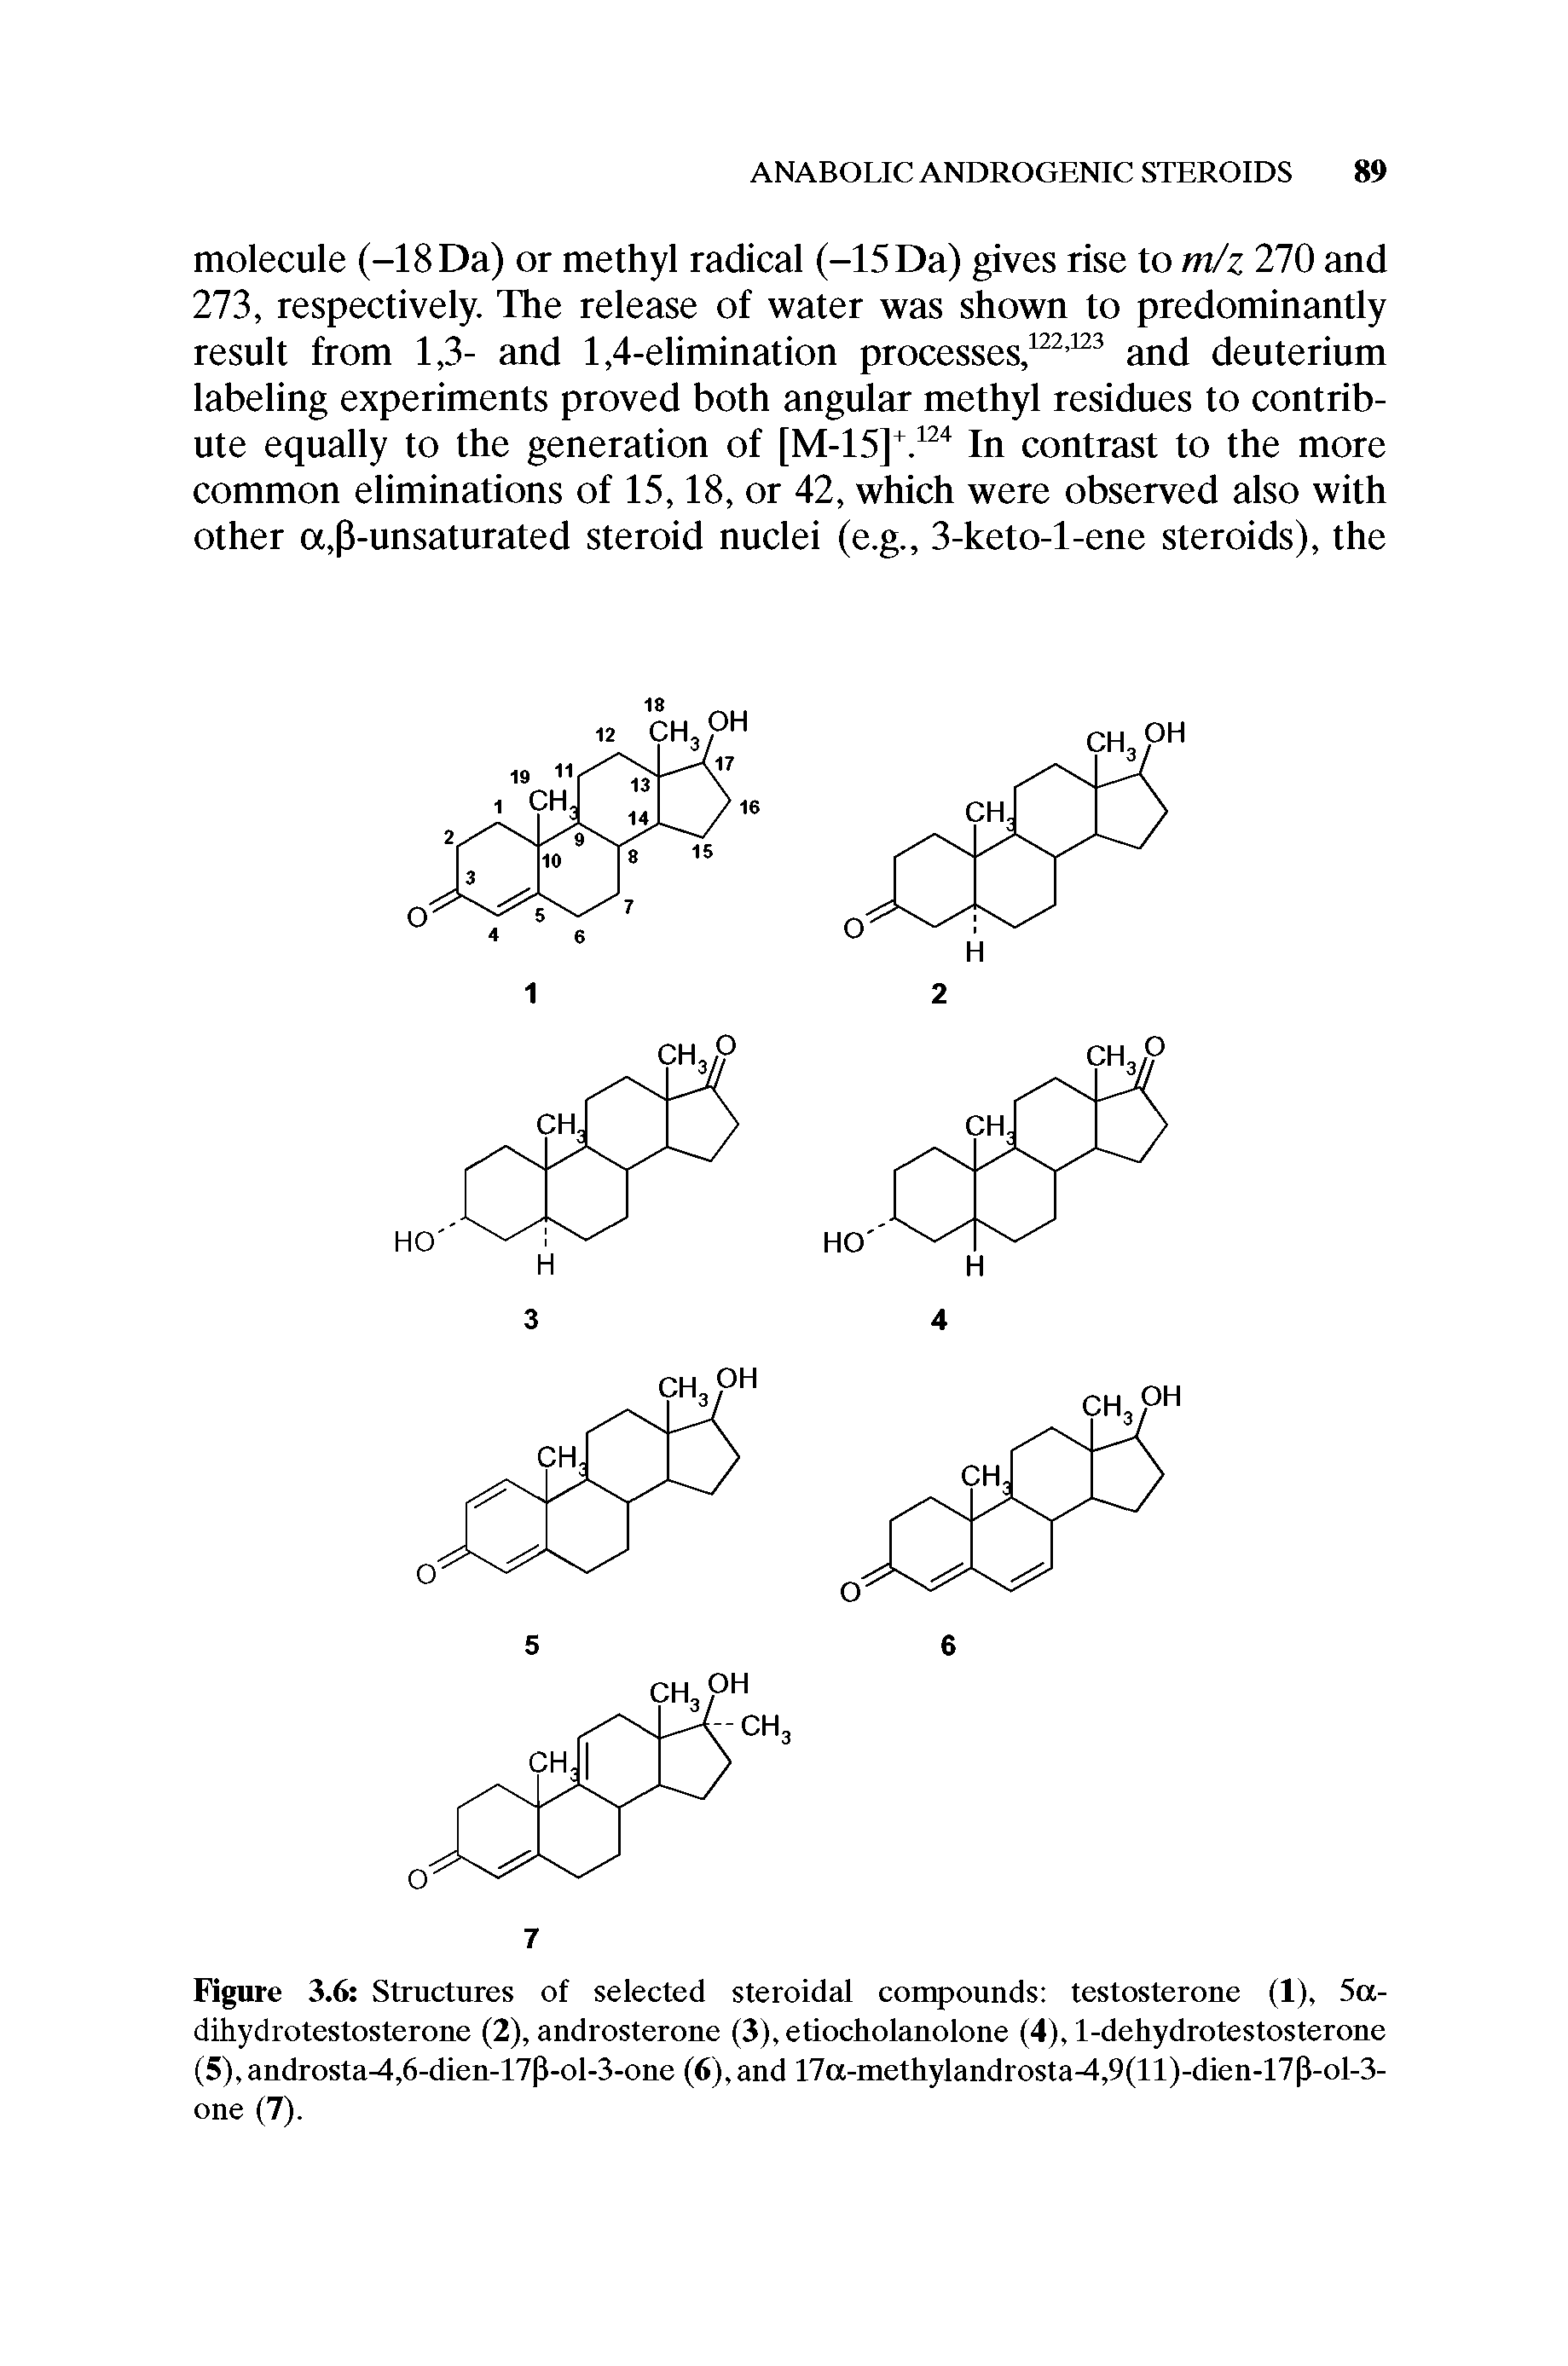 Figure 3.6 Structures of selected steroidal compounds testosterone (1), 5a-dihydrotestosterone (2), androsterone (3),etiocholanolone (4), 1-dehydrotestosterone (5), androsta, 6-dien-17p-ol-3-one (6), and 17a-methylandrosta-4,9(ll)-dien-17P-ol-3-one (7).